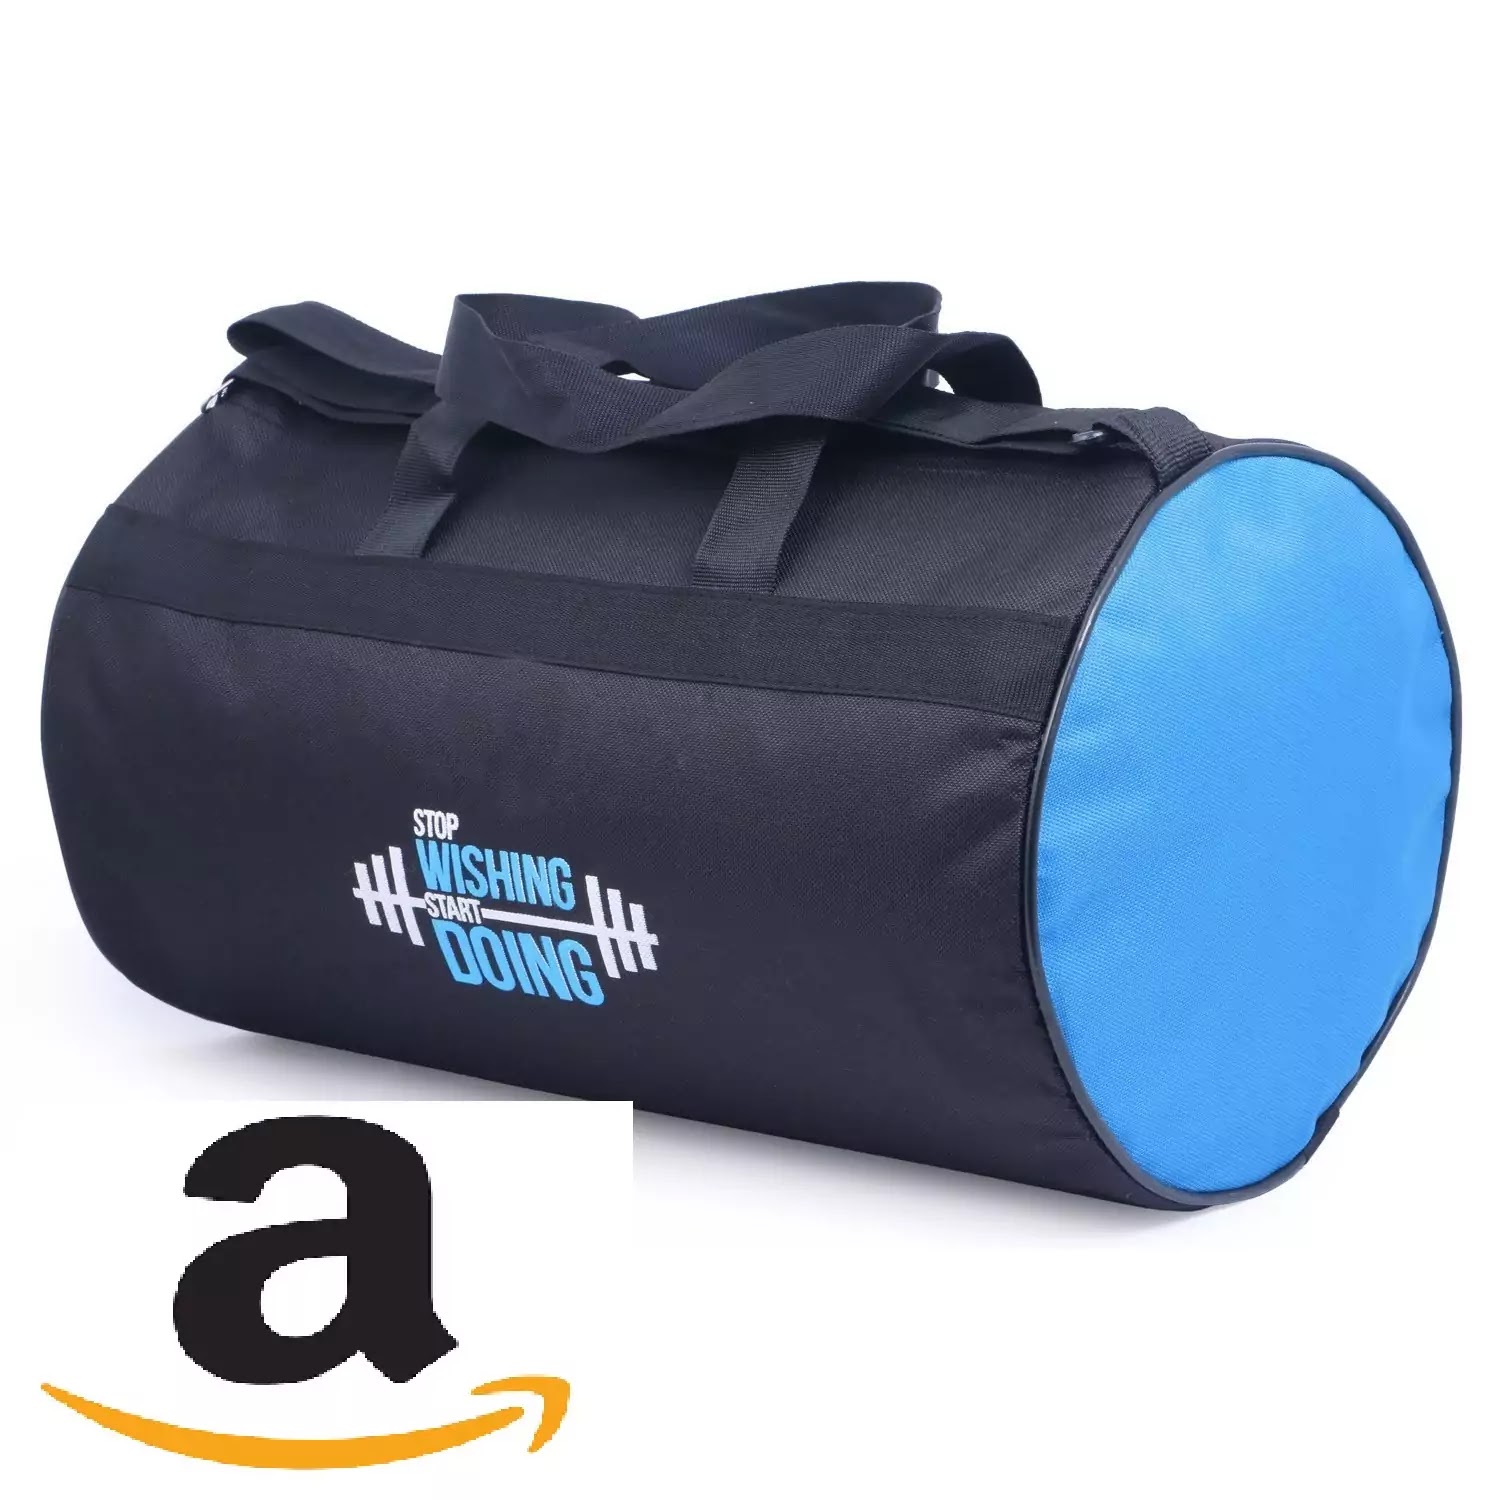 Best Gym Bags Under 700 In India